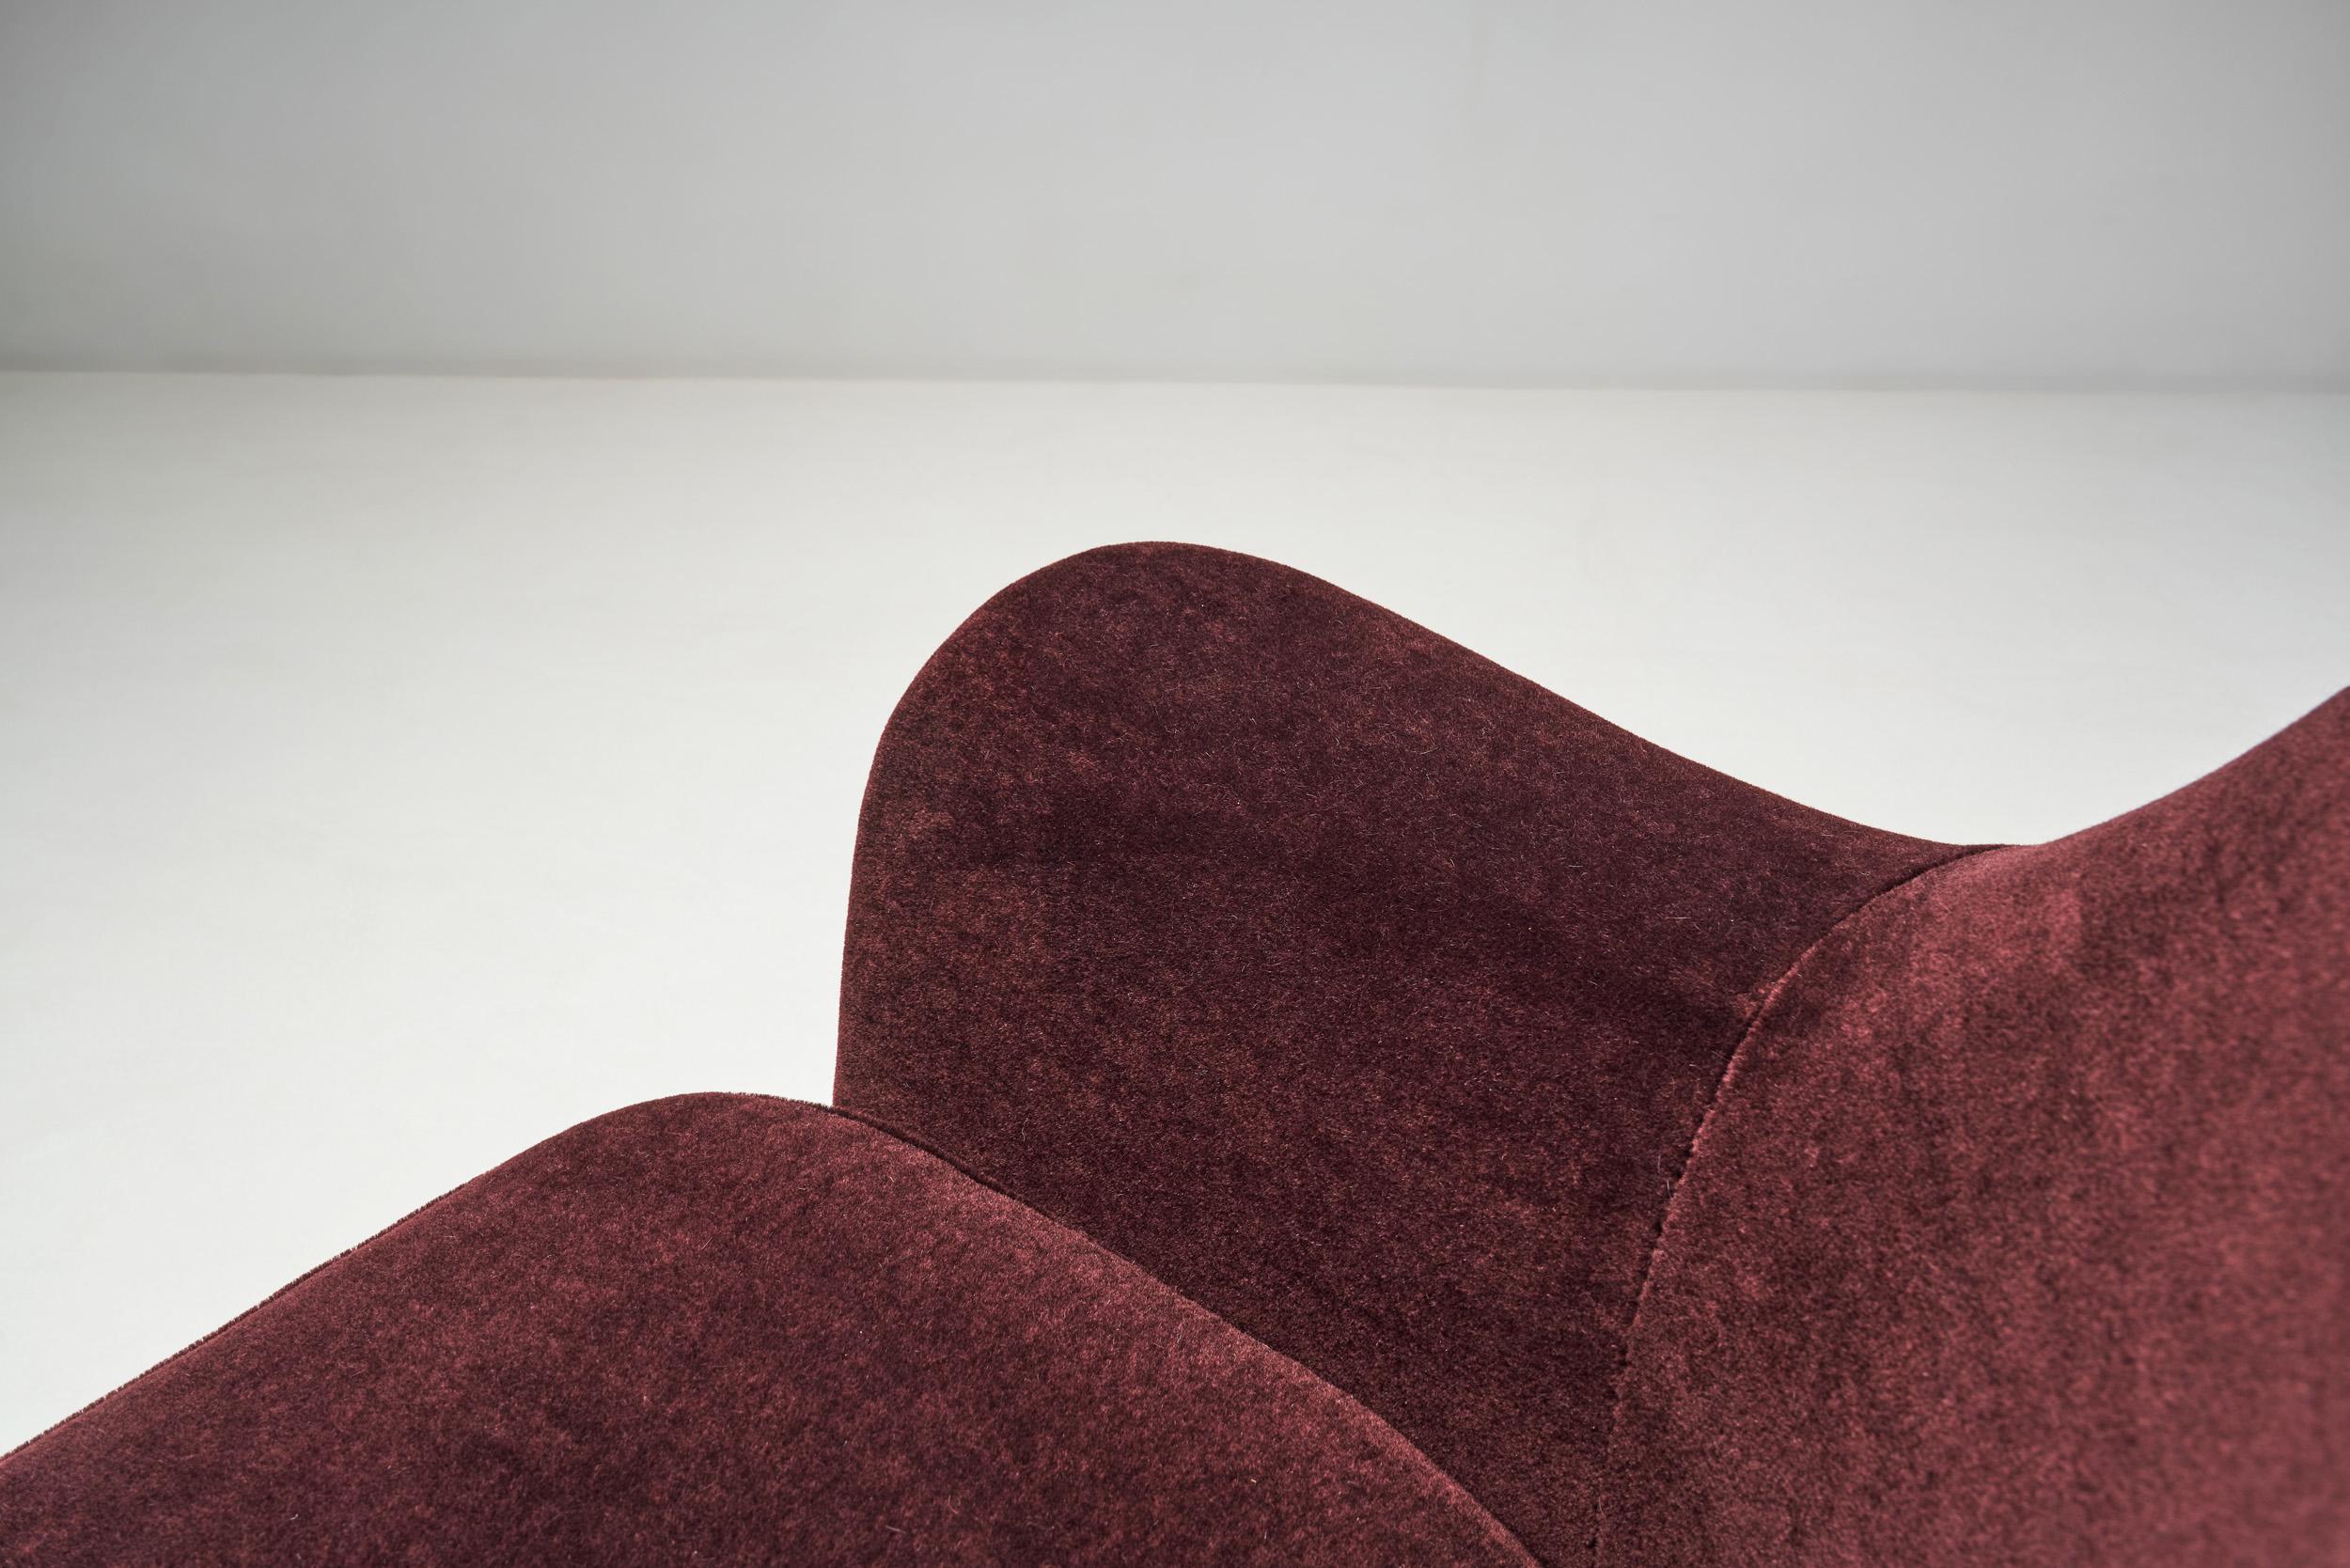 French Lounge Chairs In Aubergine Coloured Mohair, France ca 1960s For Sale 1